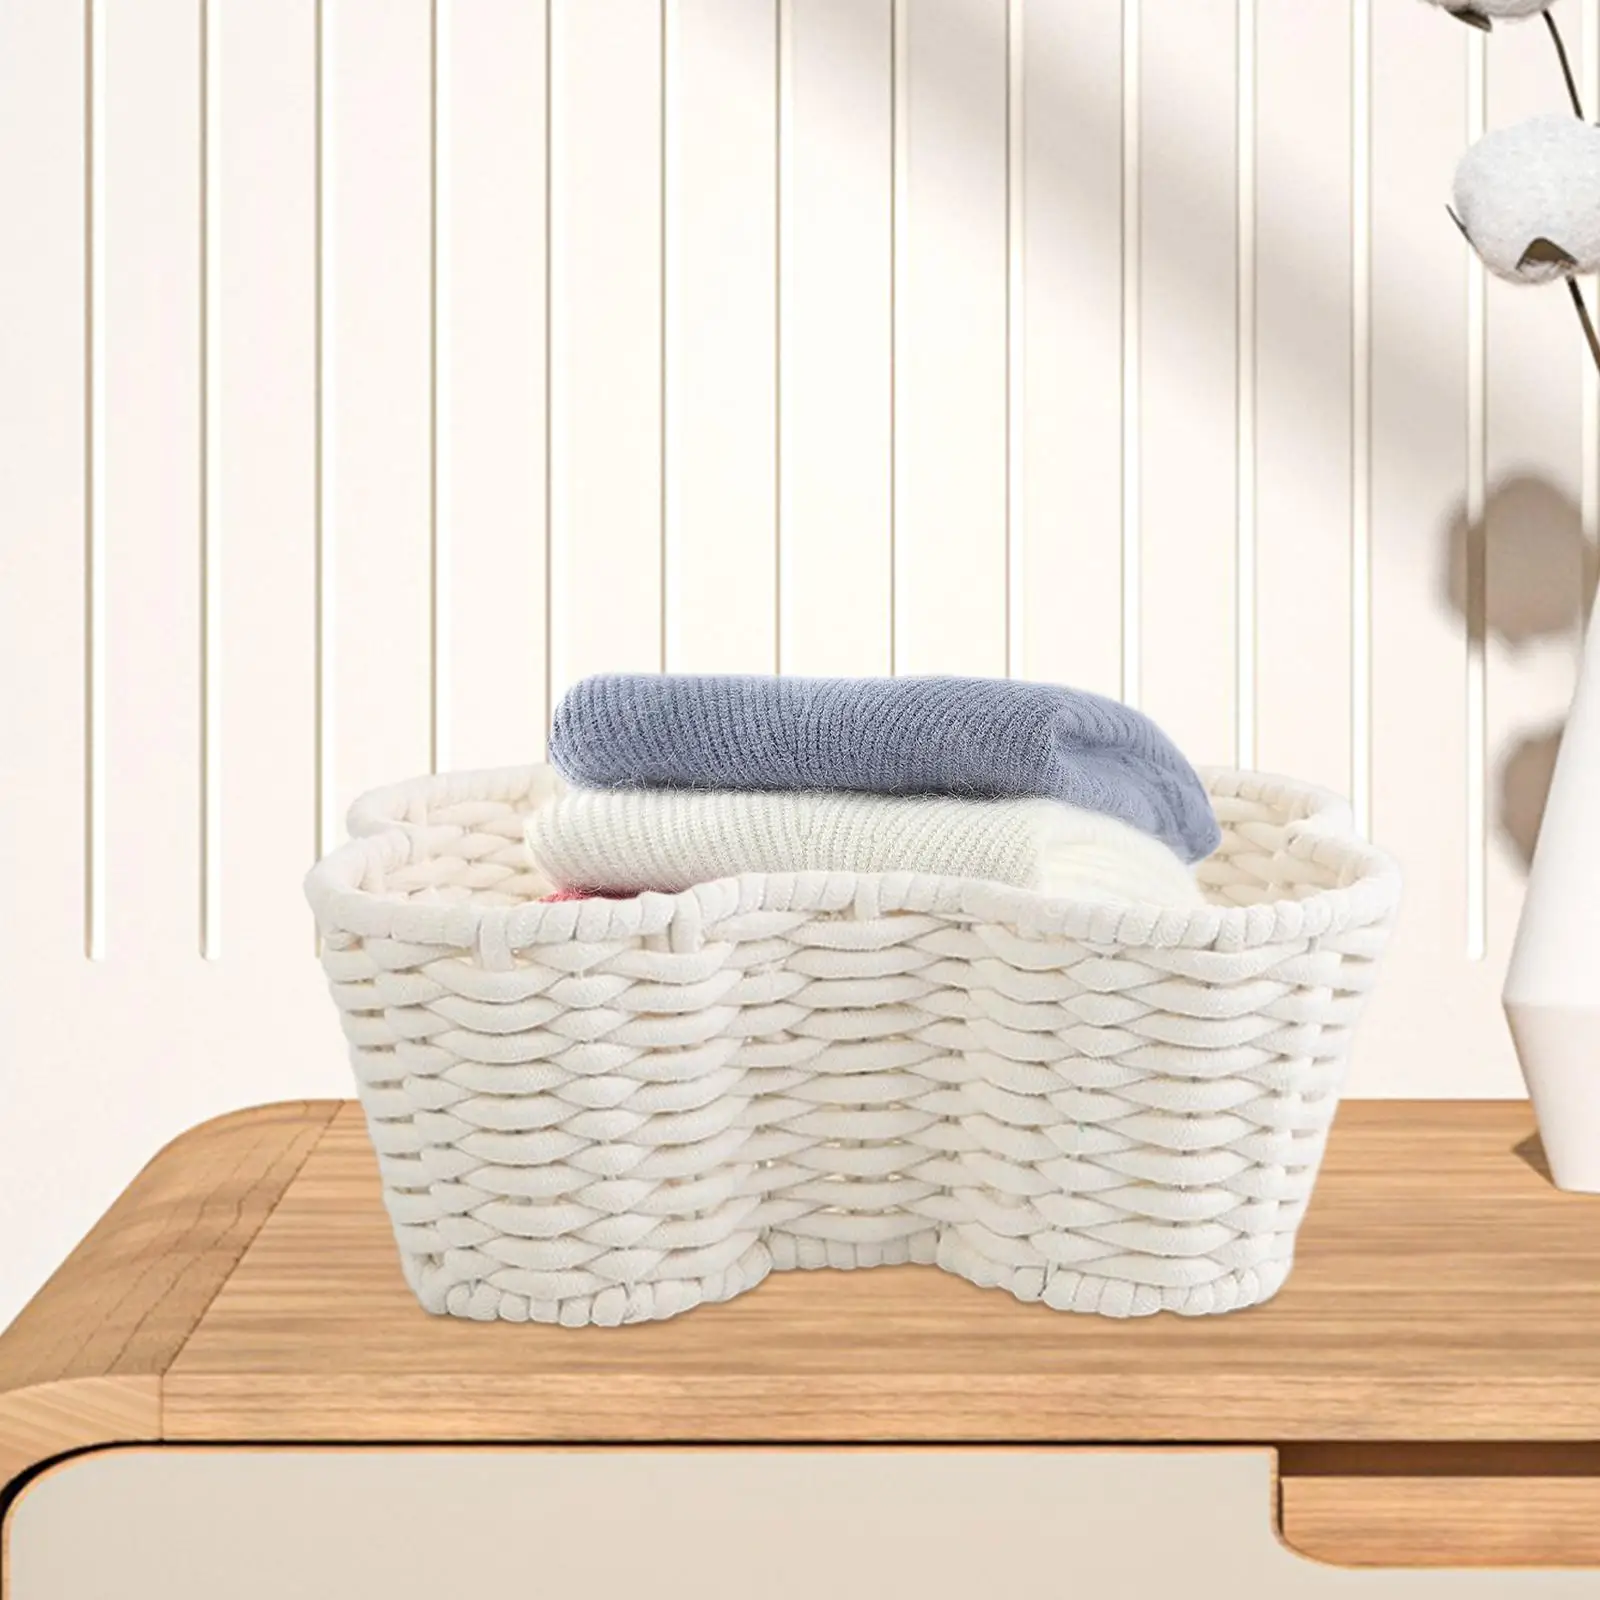 Handwoven Storage Basket Handcrafted Sundries Storage Box Soft Practical Household for Tabletop Bedroom Cabinet Kitchen Towels